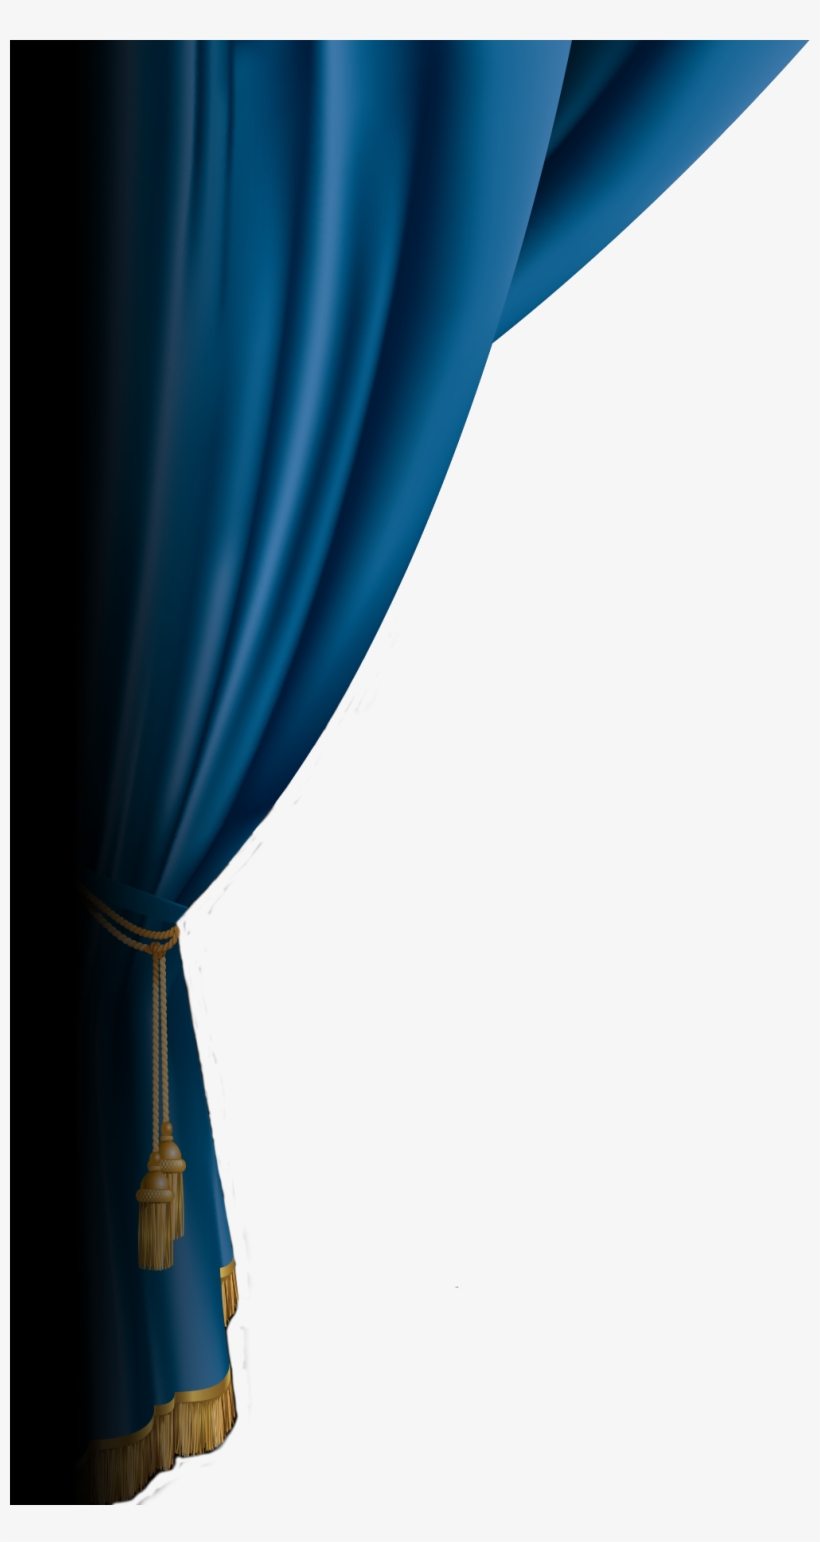 Home - About - Blue Stage Curtain Png, transparent png #4165897